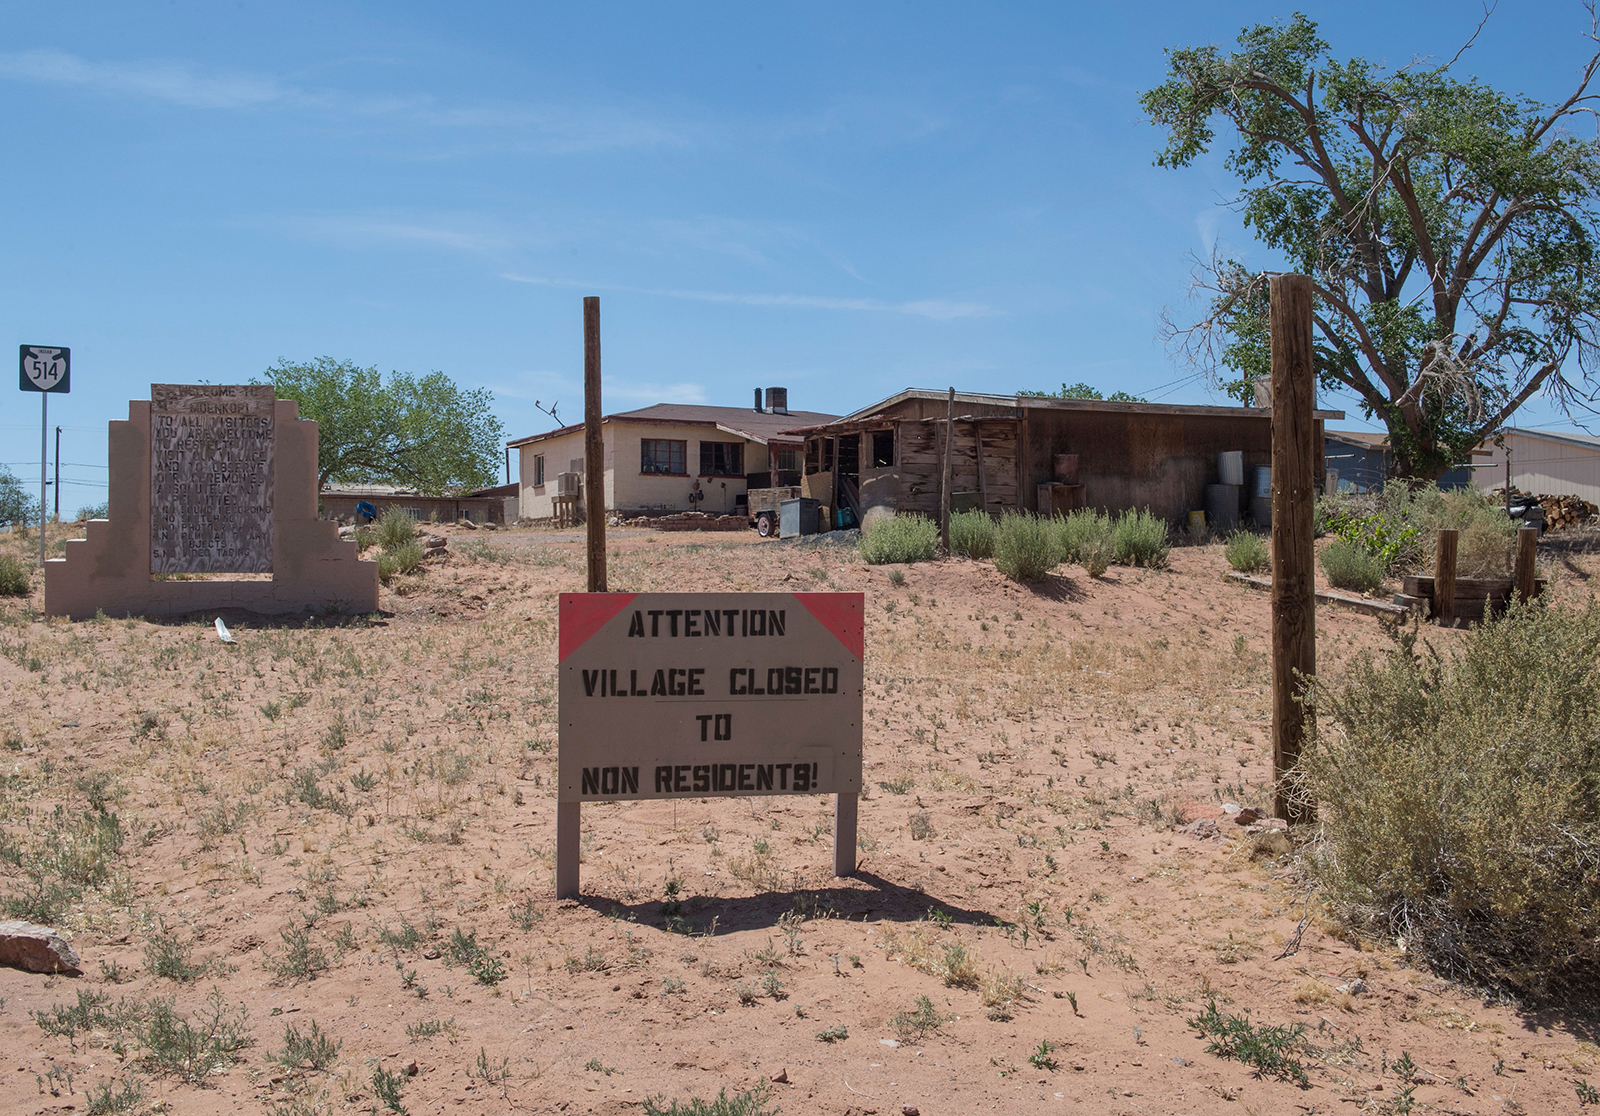 A sign warning non-residents to stay out of the Navajo Nation town of Tuba City during a 57-hour curfew, imposed to try to stop the spread of the Covid-19 virus through the Navajo Nation, in Arizona on May 24.